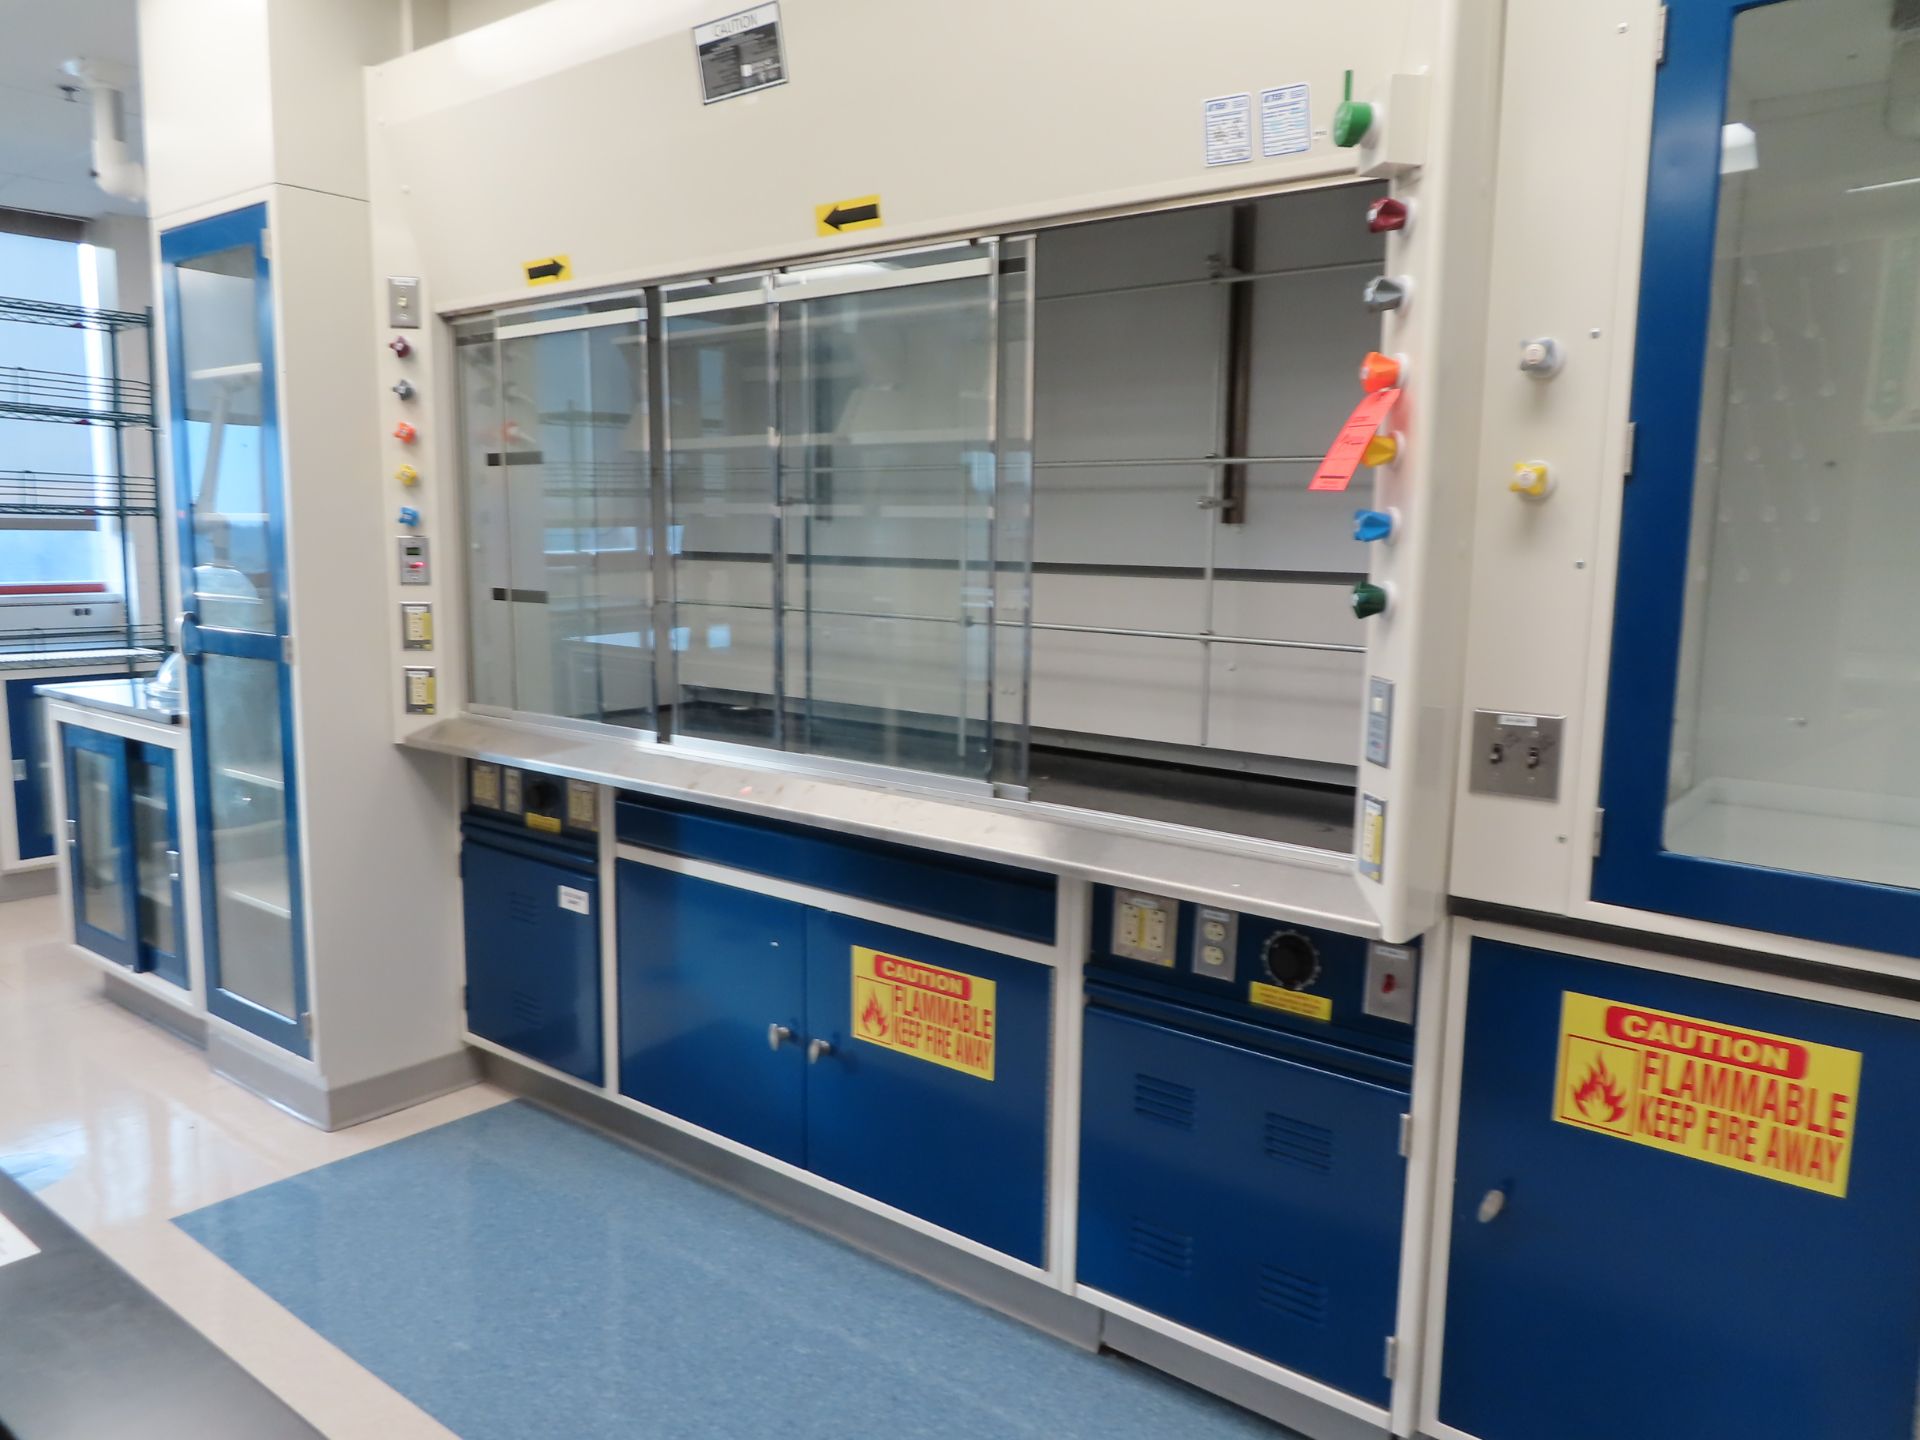 Lot of (2) Kewaunee Supreme Air fume hoods with base cabinets, 7'4" X 26", located in A Wing, 4th